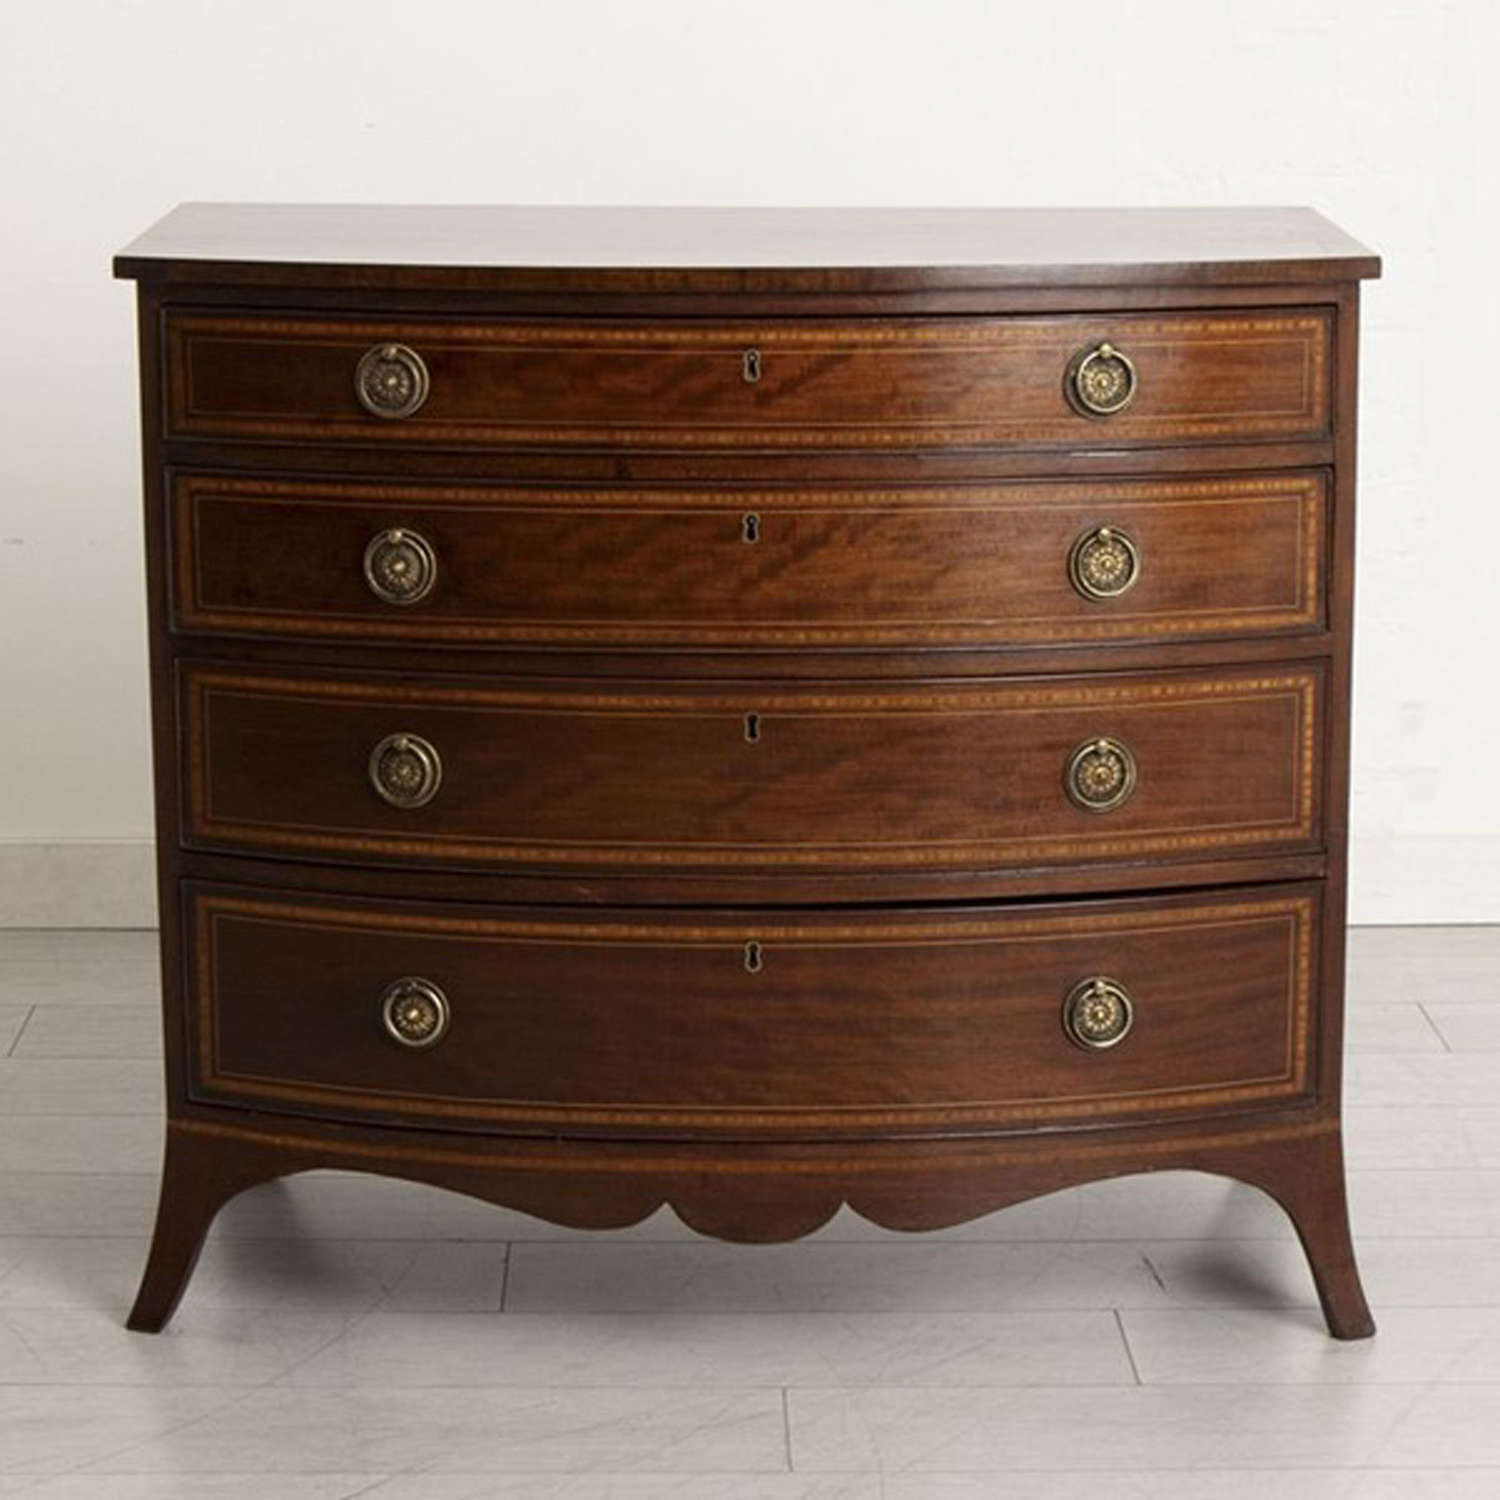 Early Georgian Inlaid Mahogany Bow Fronted Chest of Drawers